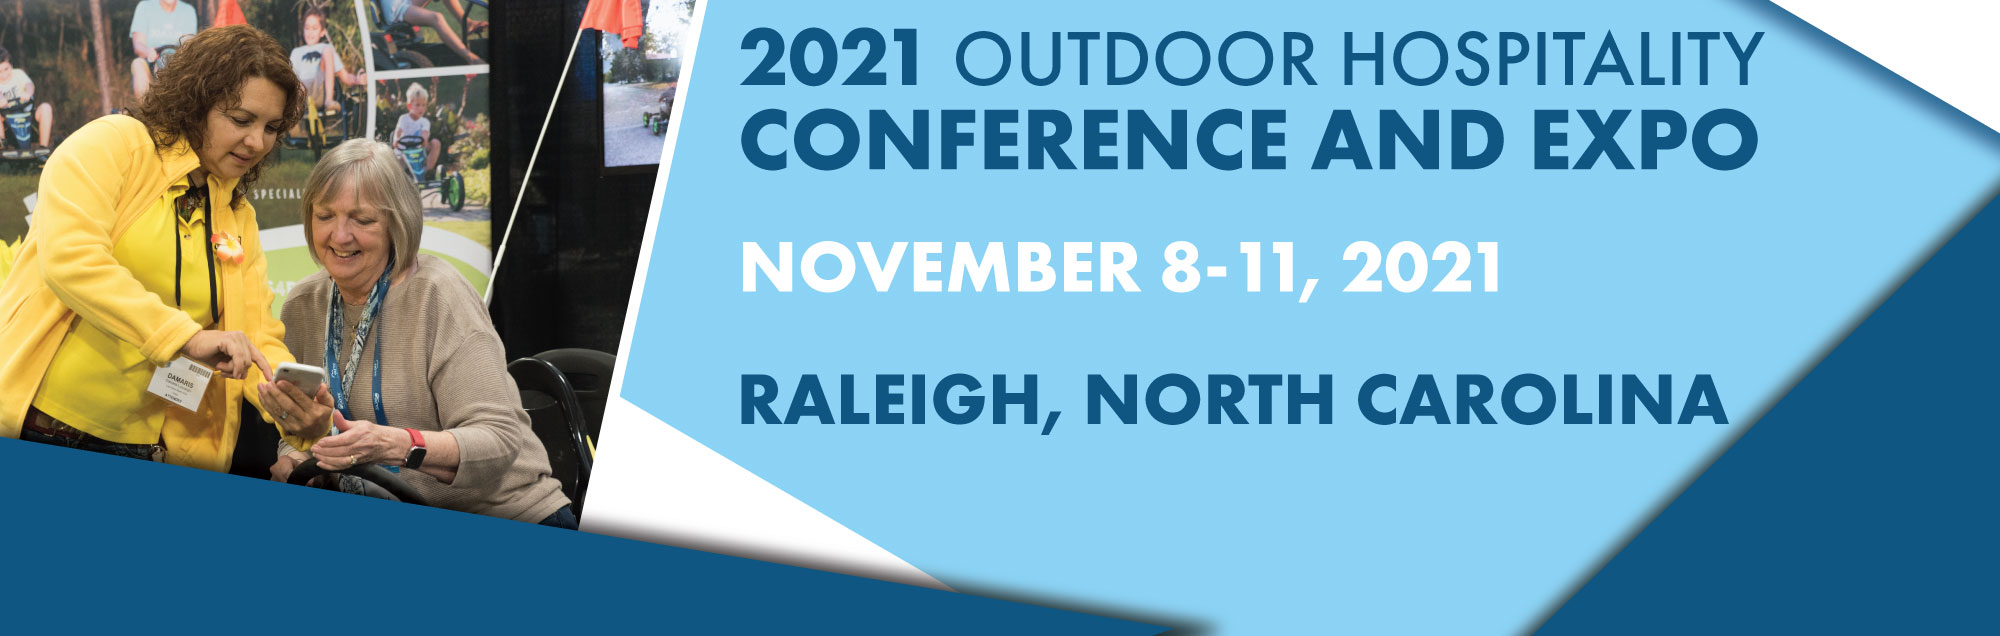 Outdoor Hospitality Conference and Expo (OHCE)